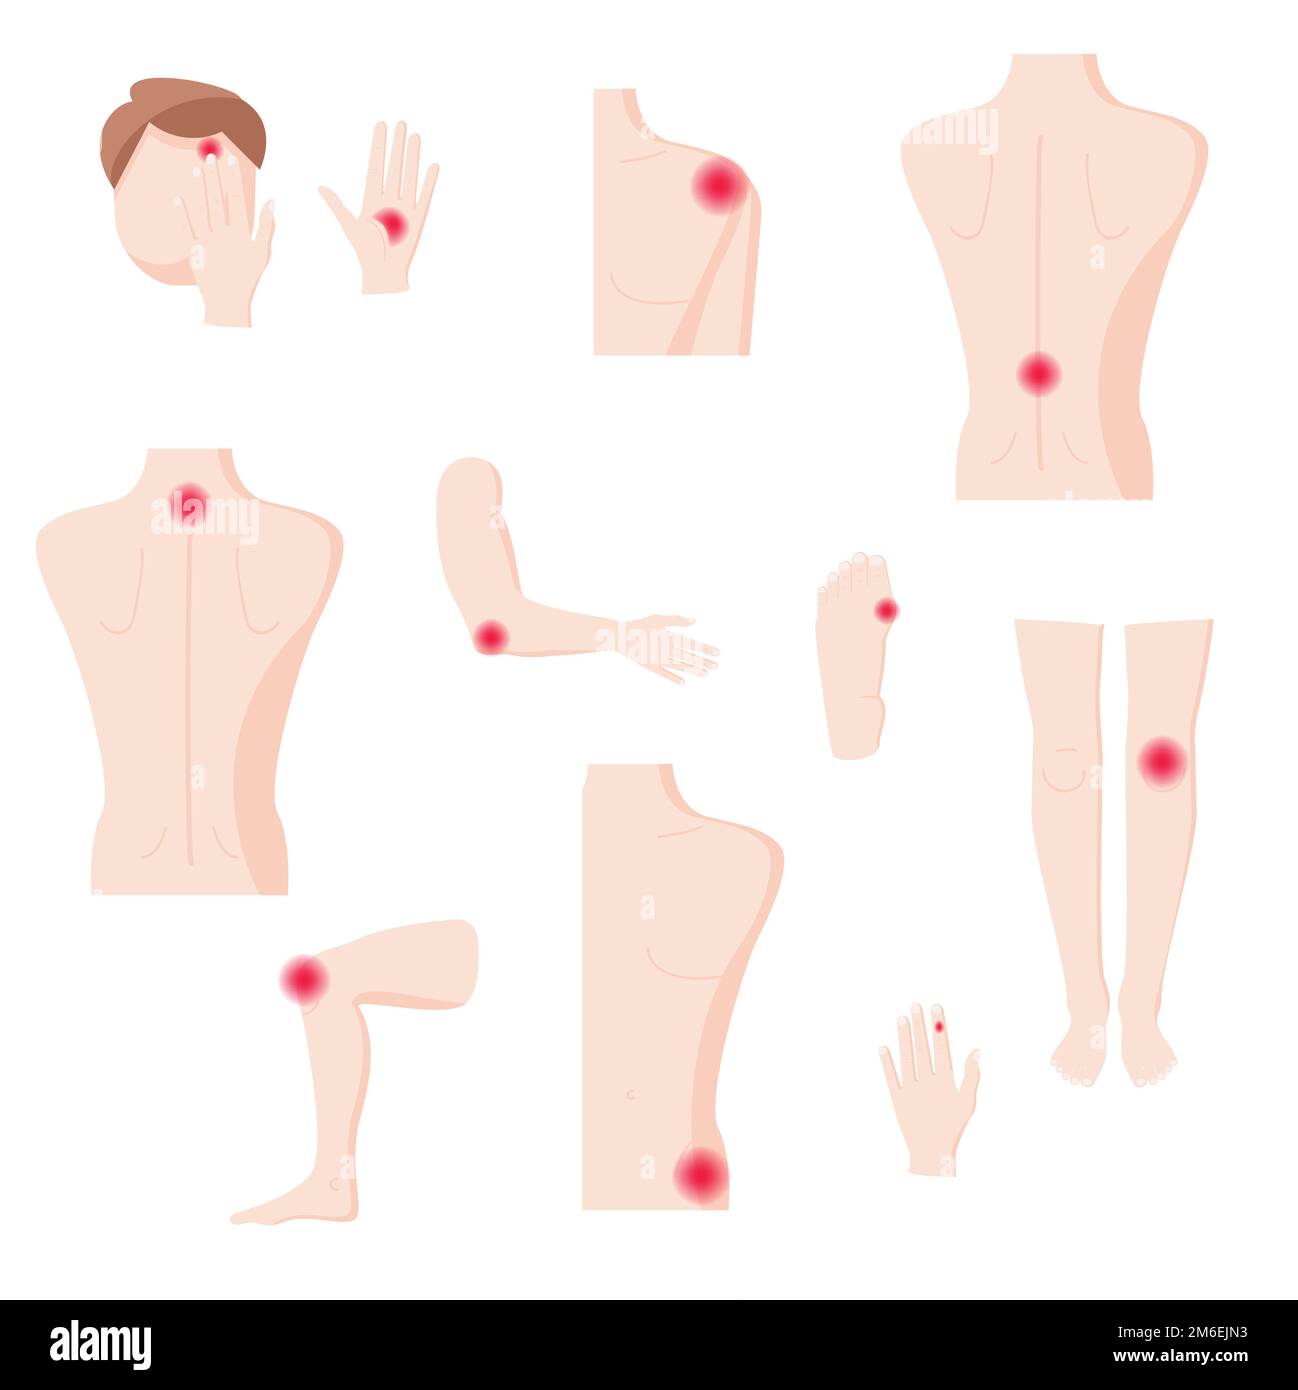 Human body parts with pain zones, vector flat isolated illustration Stock Vector